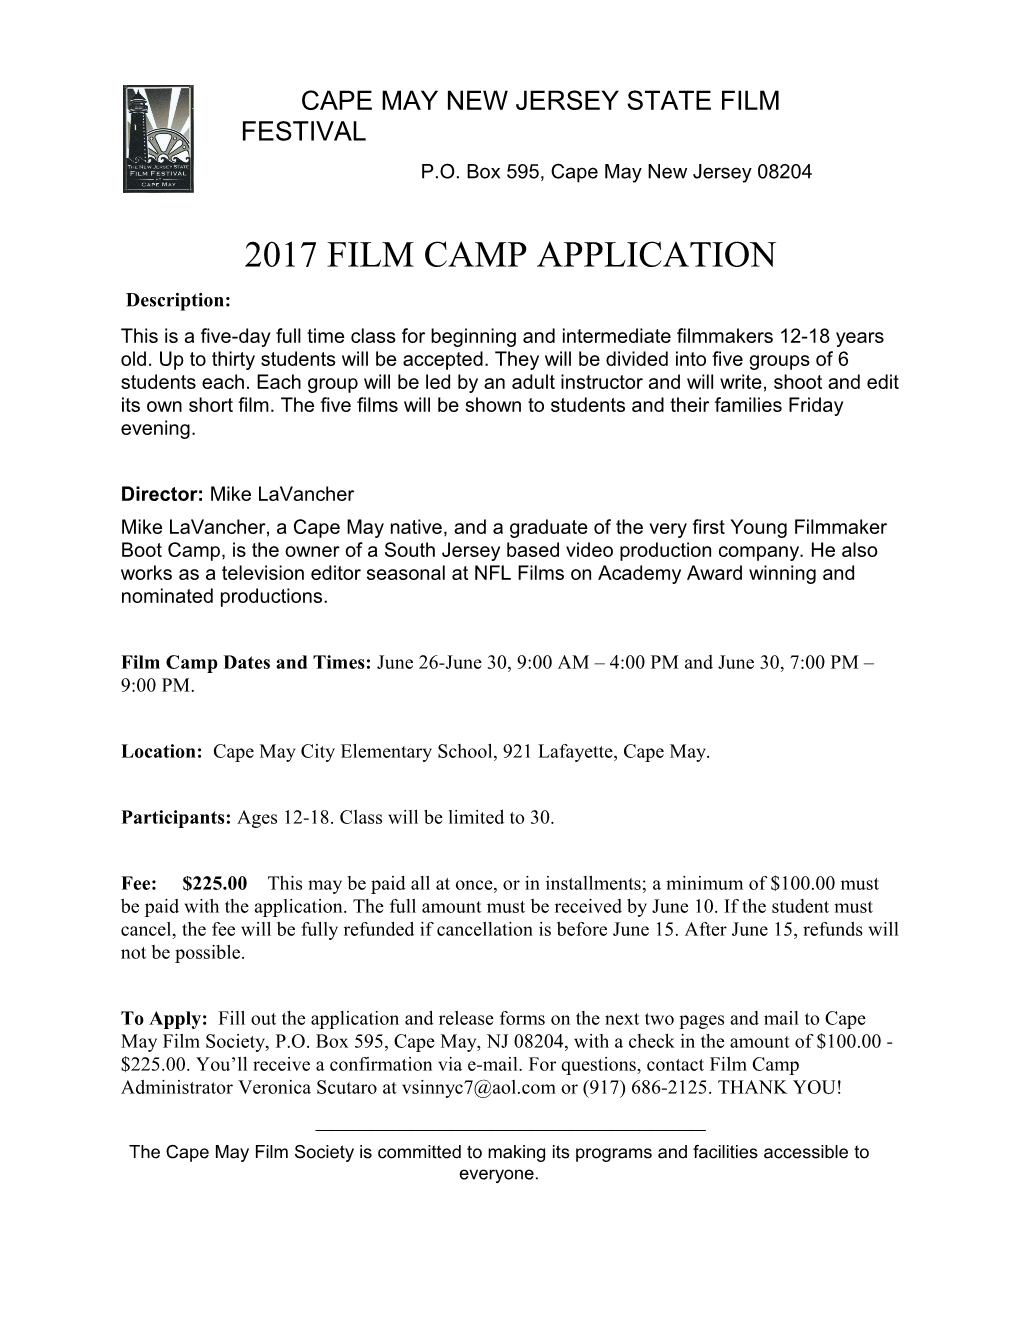 Cape May New Jersey State Film Festival